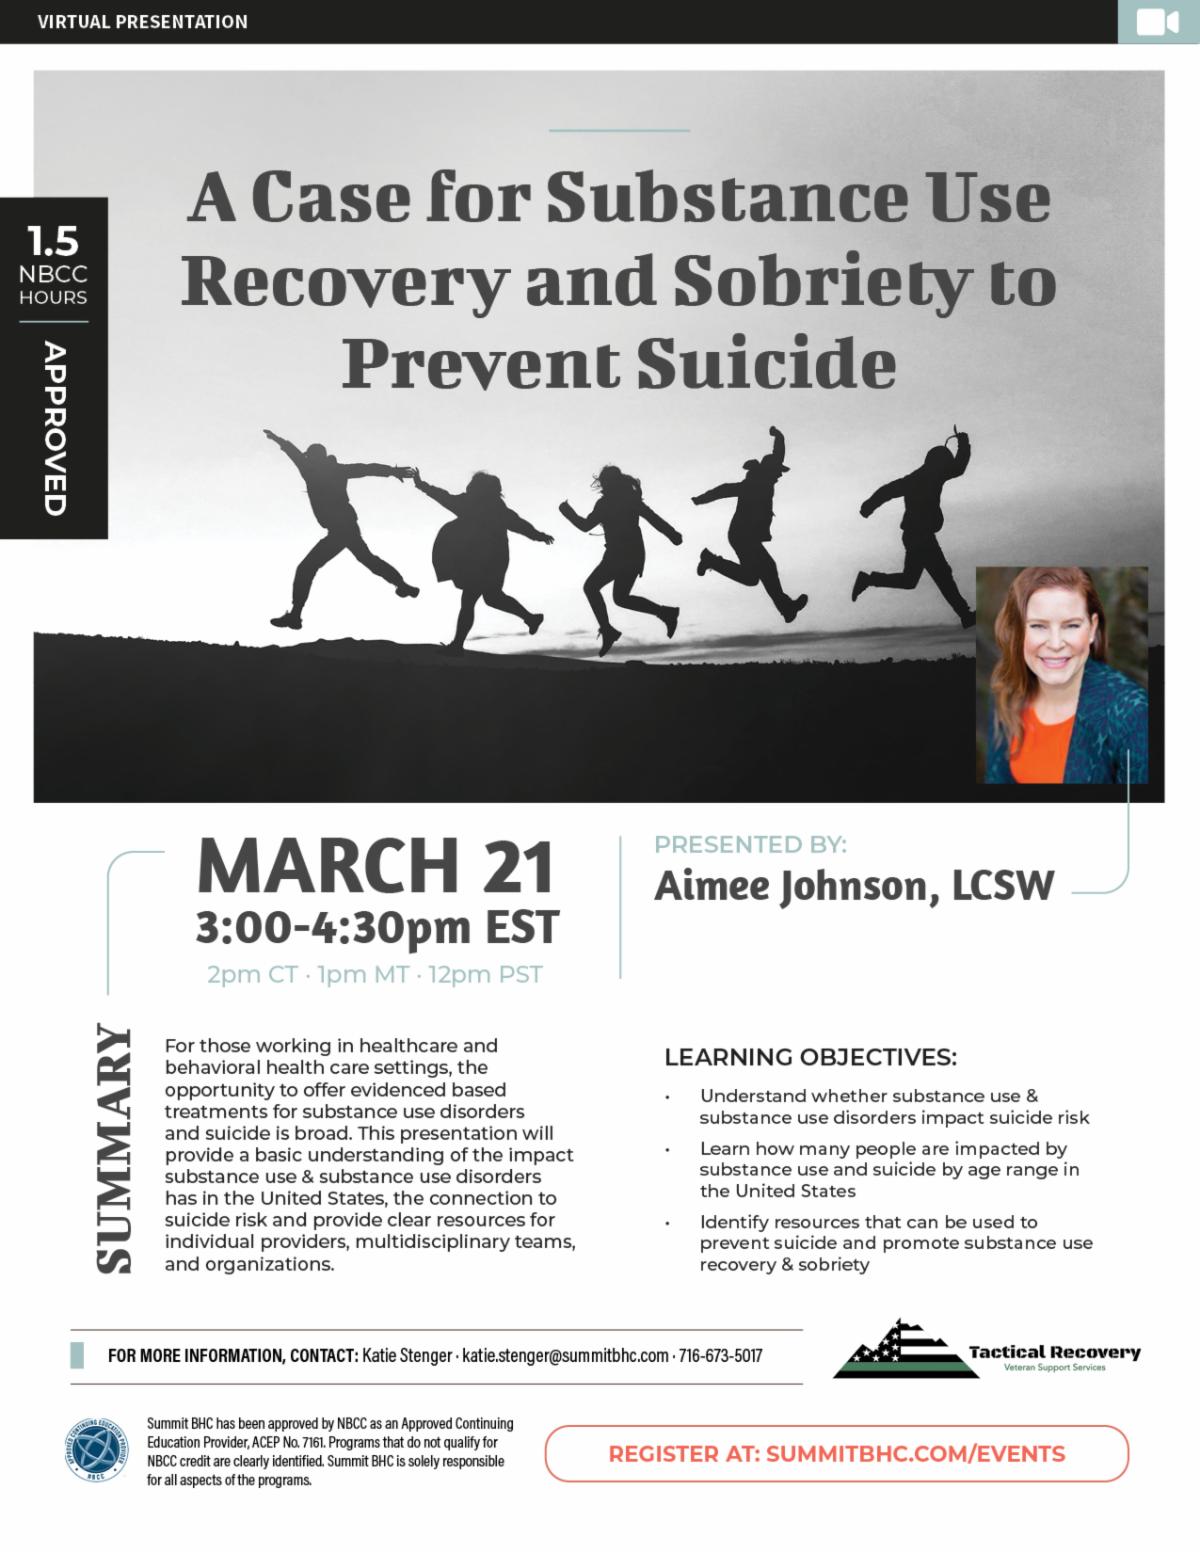 A Case for Substance Use Recovery and Sobriety to Prevent Suicide